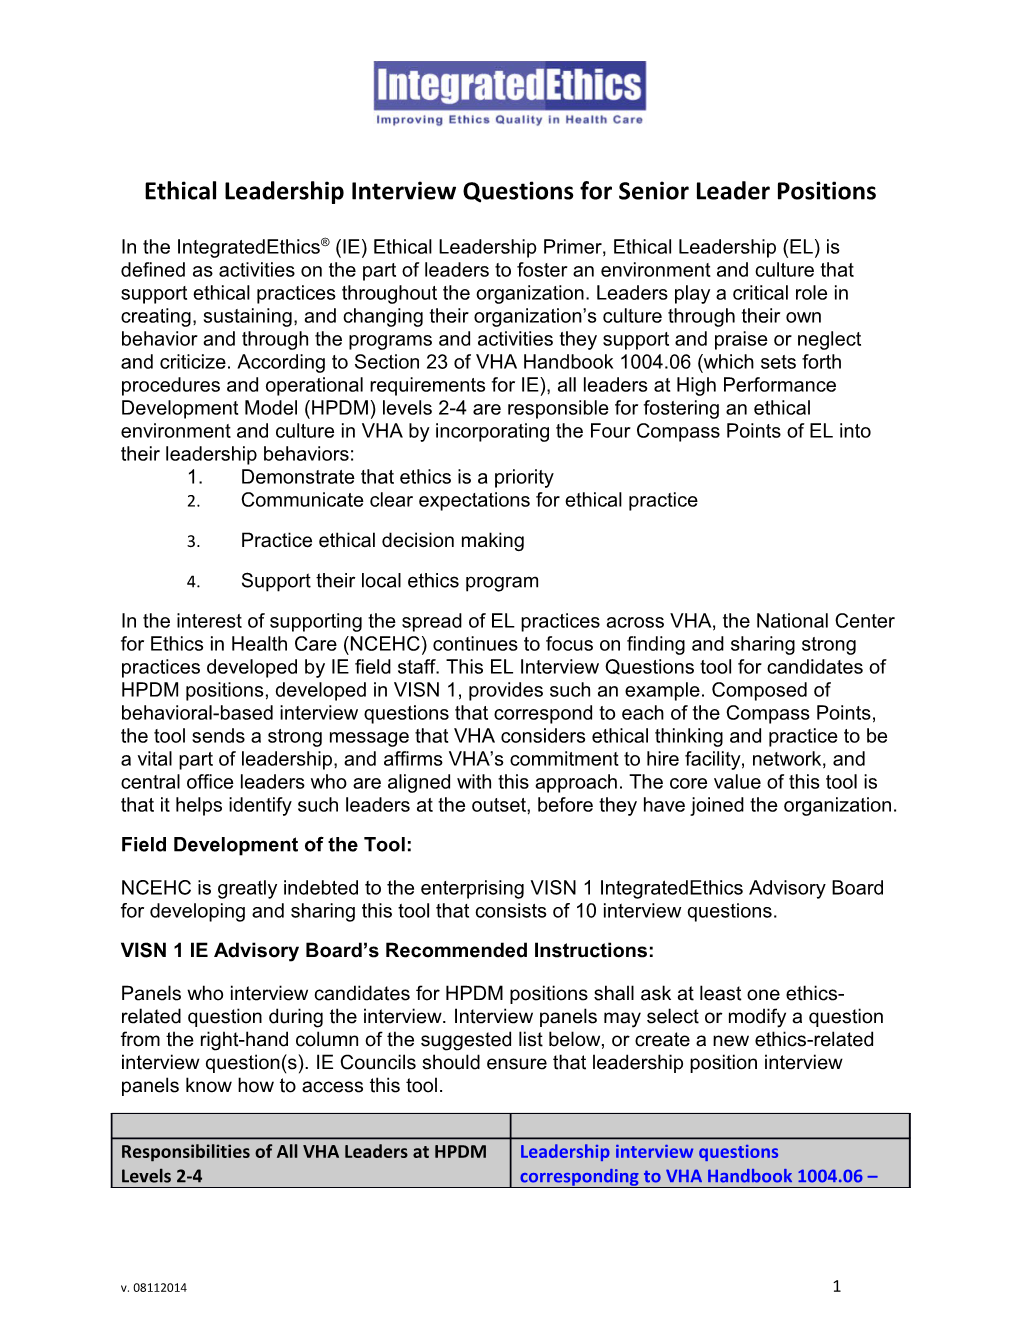 Ethical Leadership Interview Questions for Senior Leader Positions